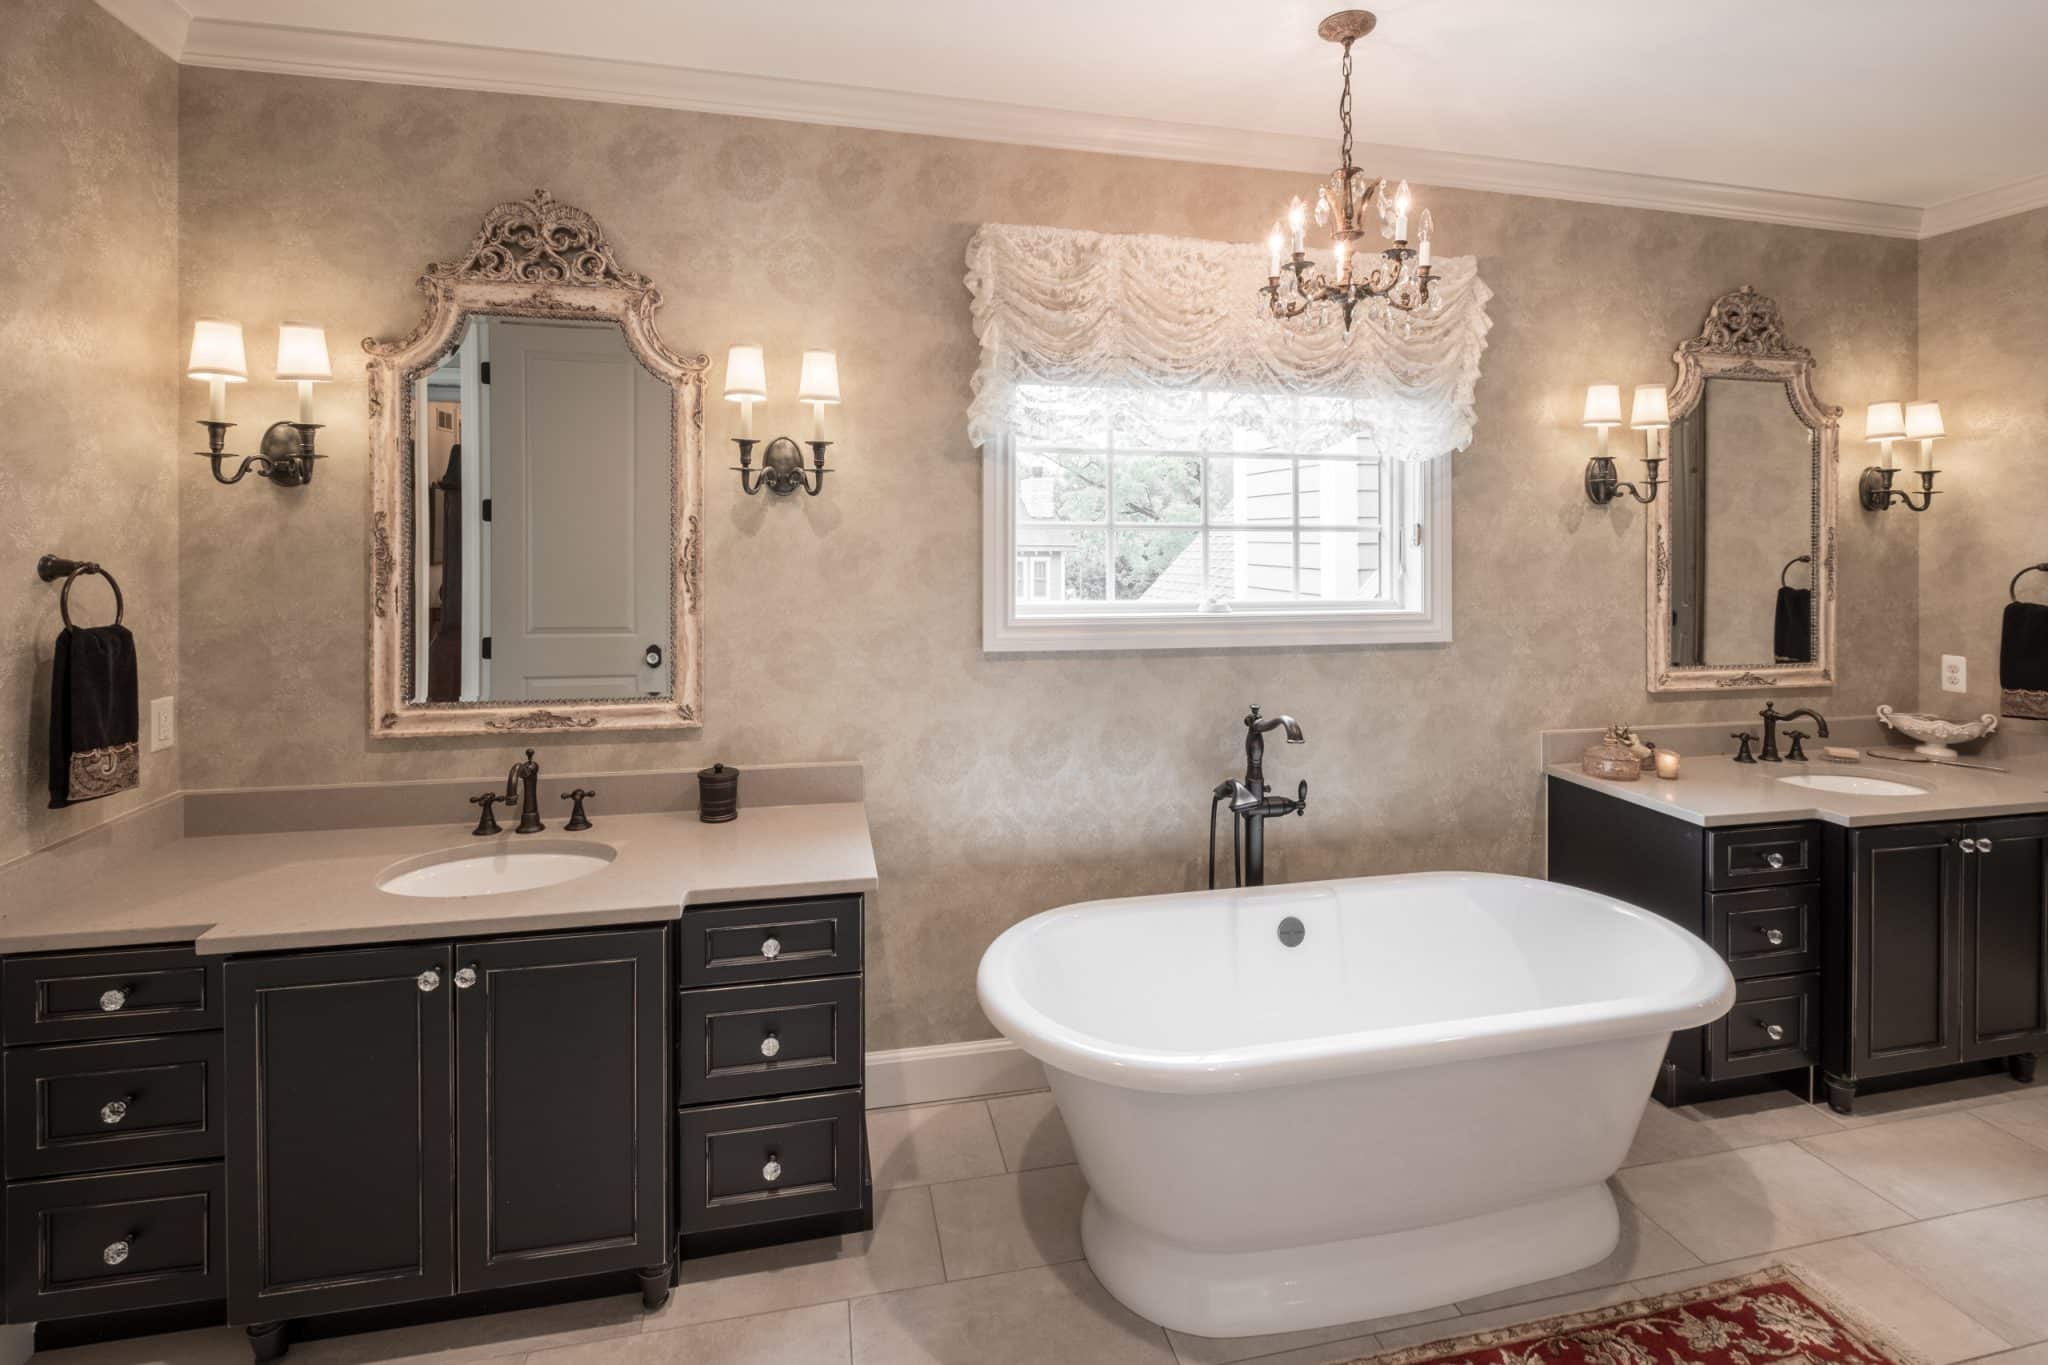 Do French Country Bathrooms Work Well in Smaller Spaces?